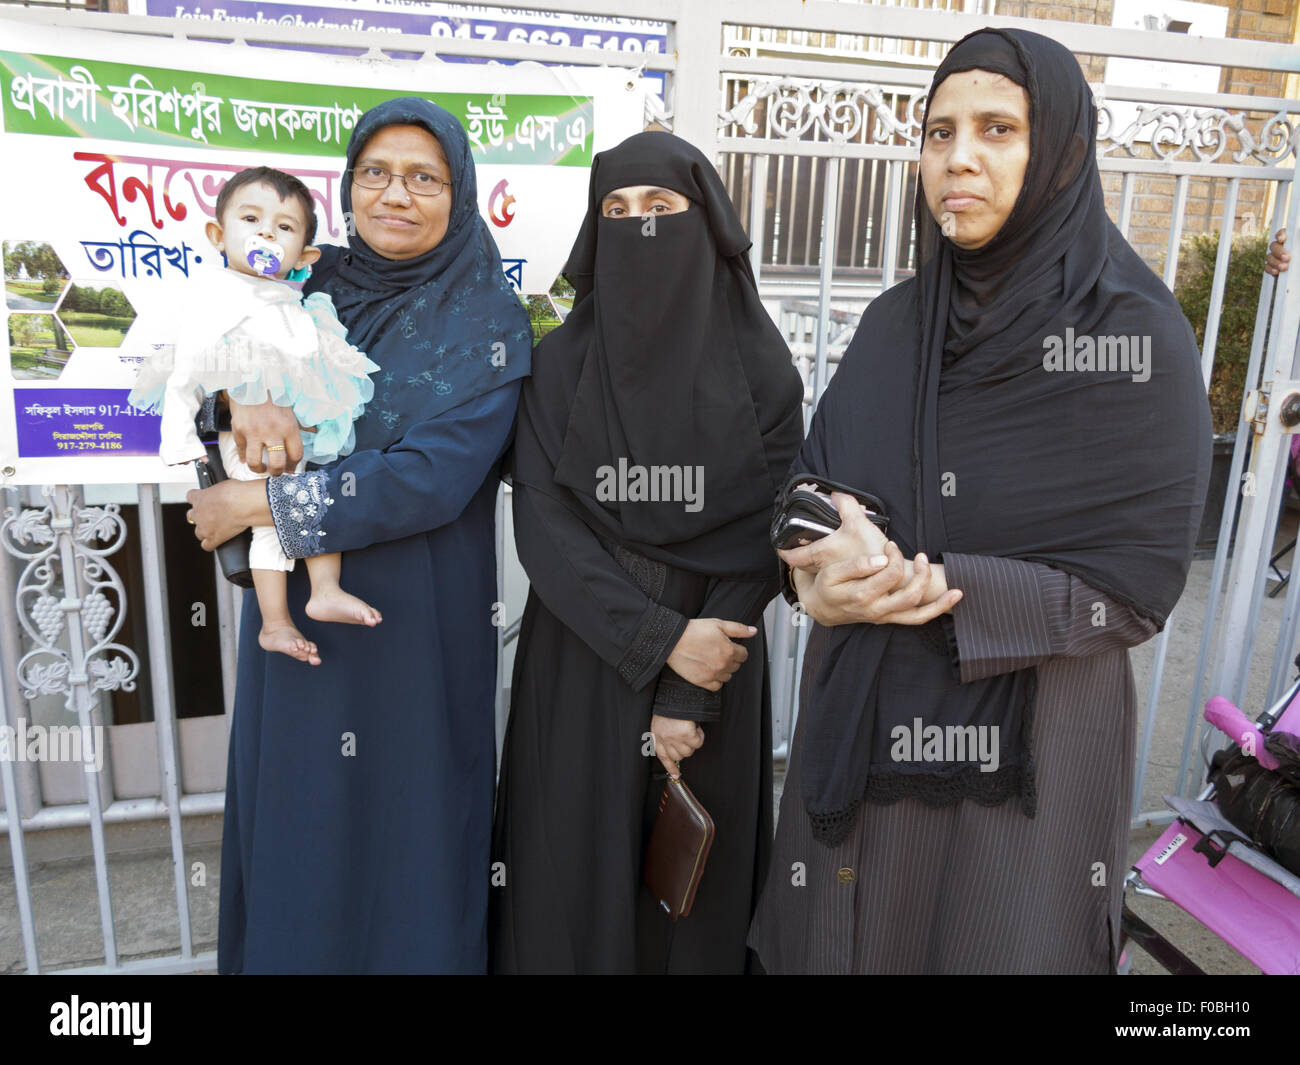 Bangladeshi women in modest dress at street fair and festival in 'Little Bangladesh' in the Kensington section of Brooklyn, NY. Stock Photo